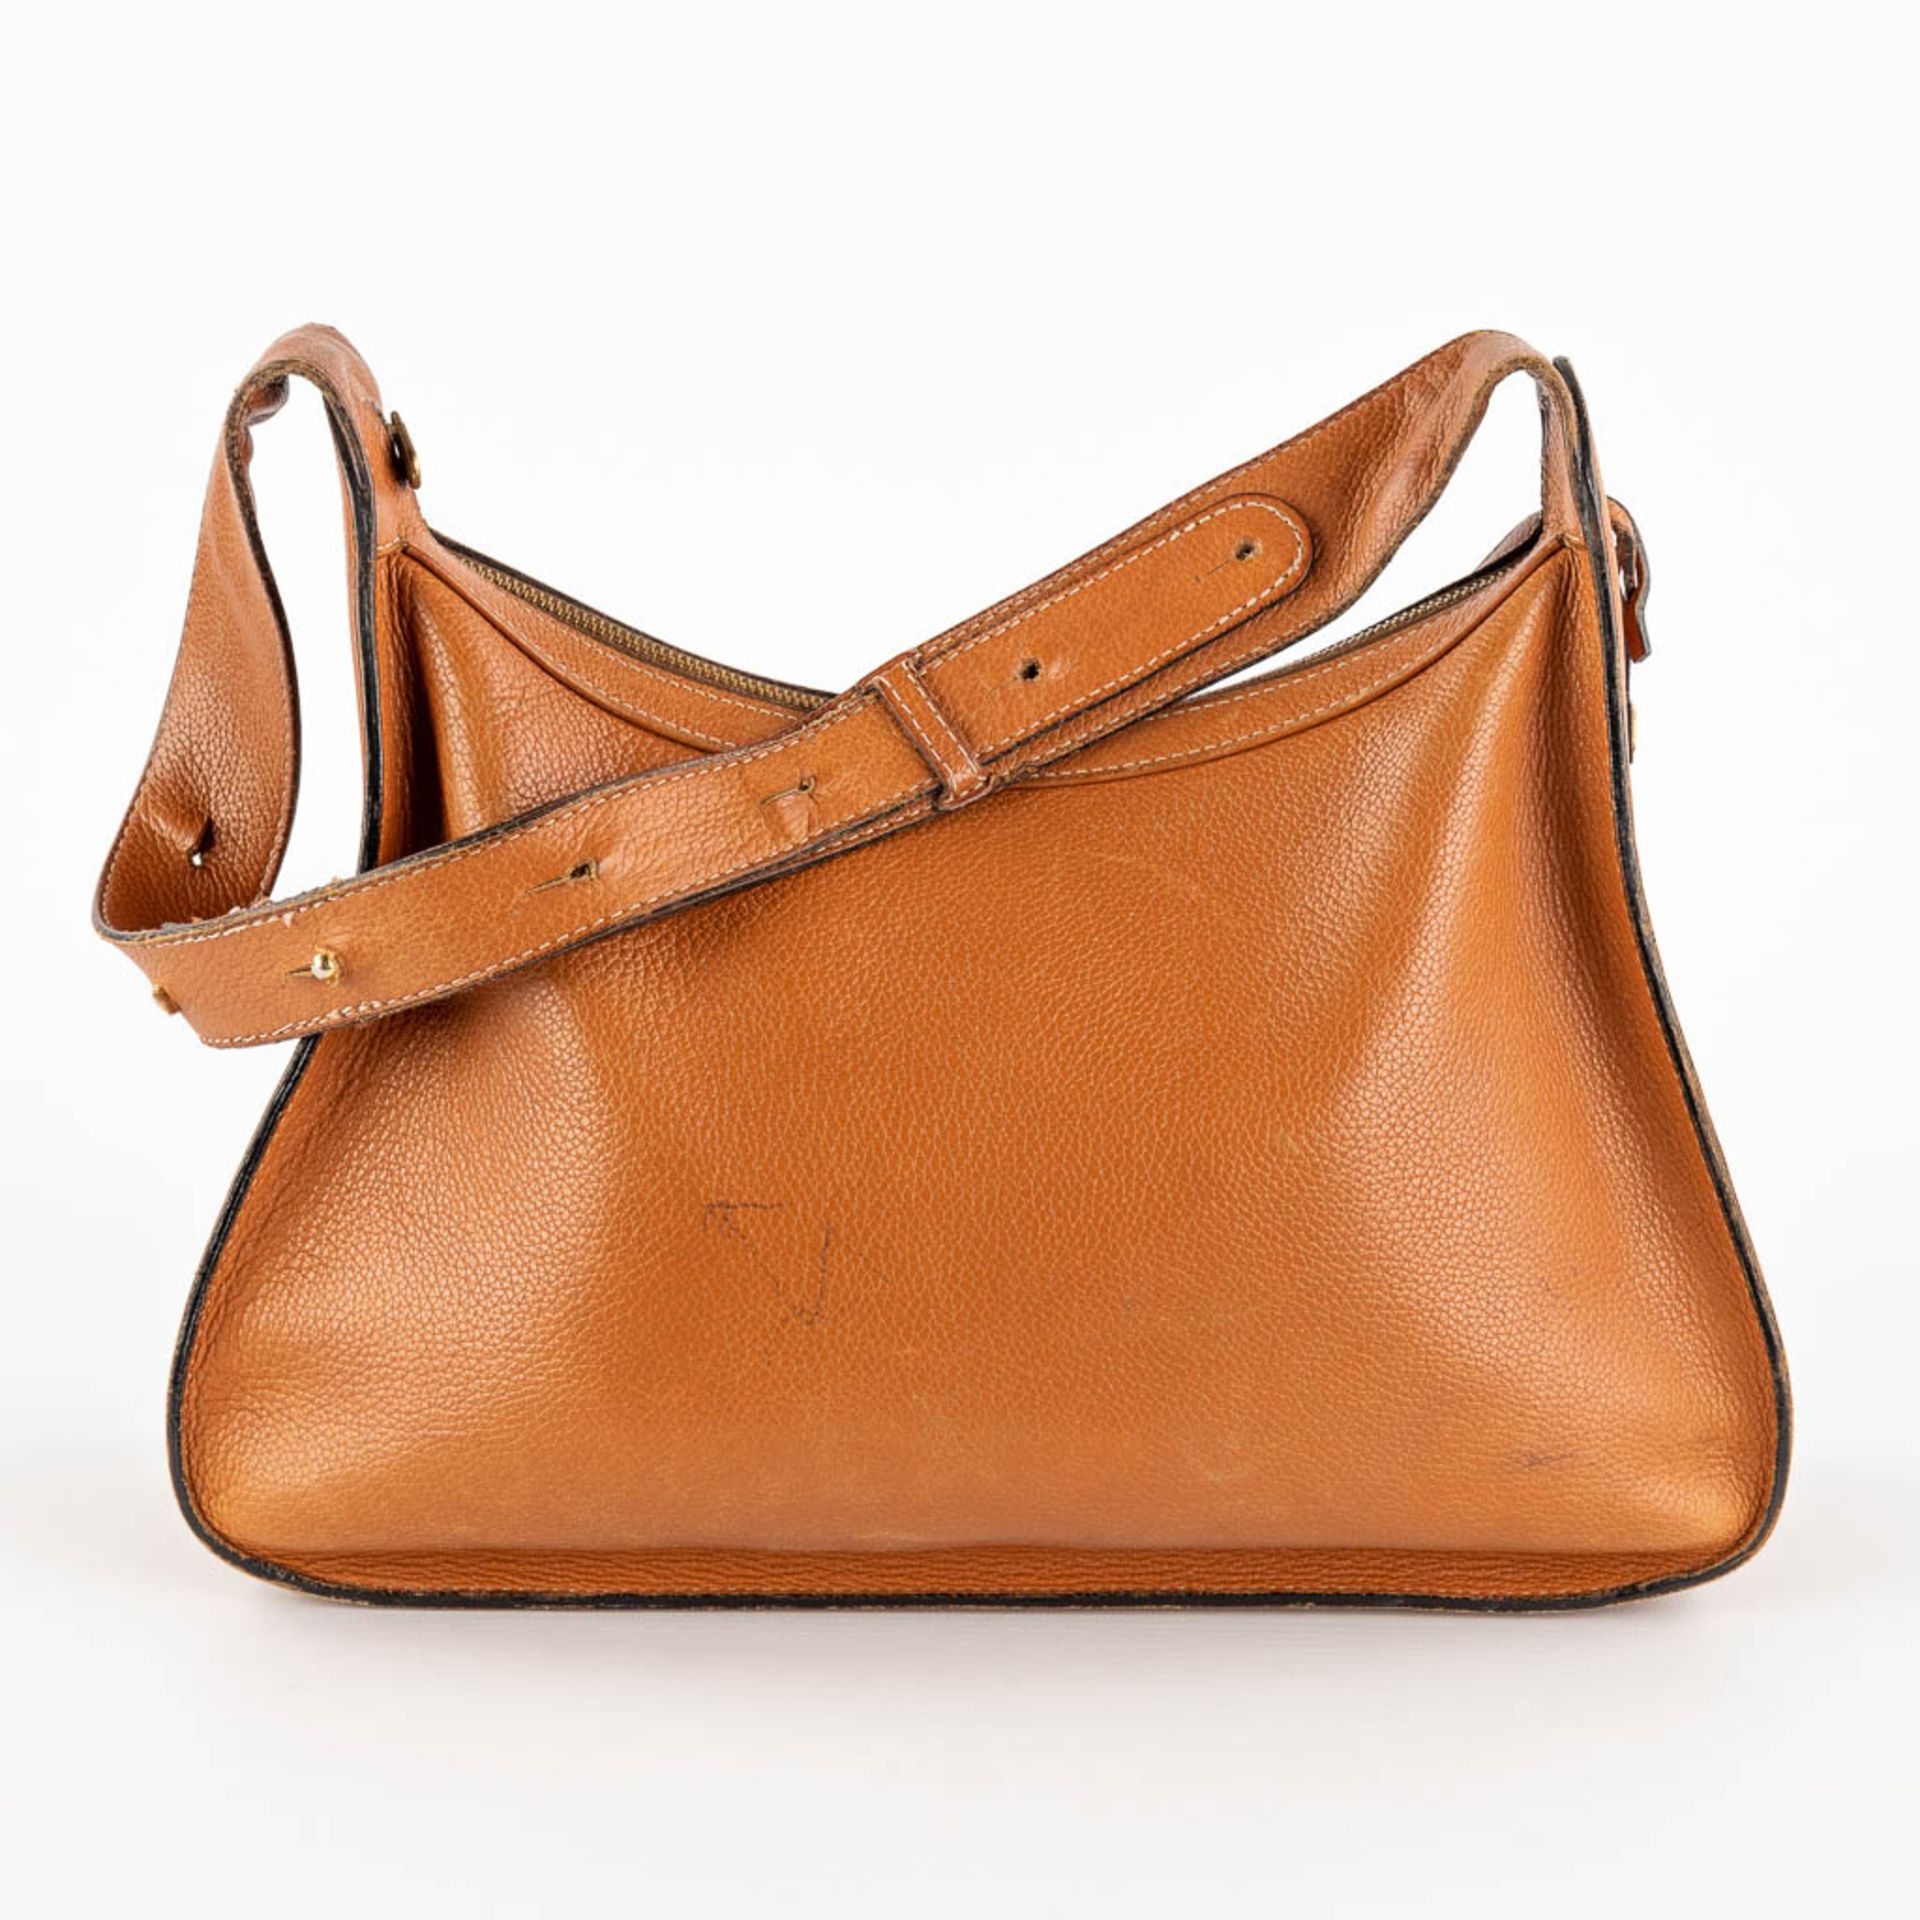 Delvaux, Pensée, a handbag made of brown leather. (W:24 x H:32 cm) - Image 6 of 18